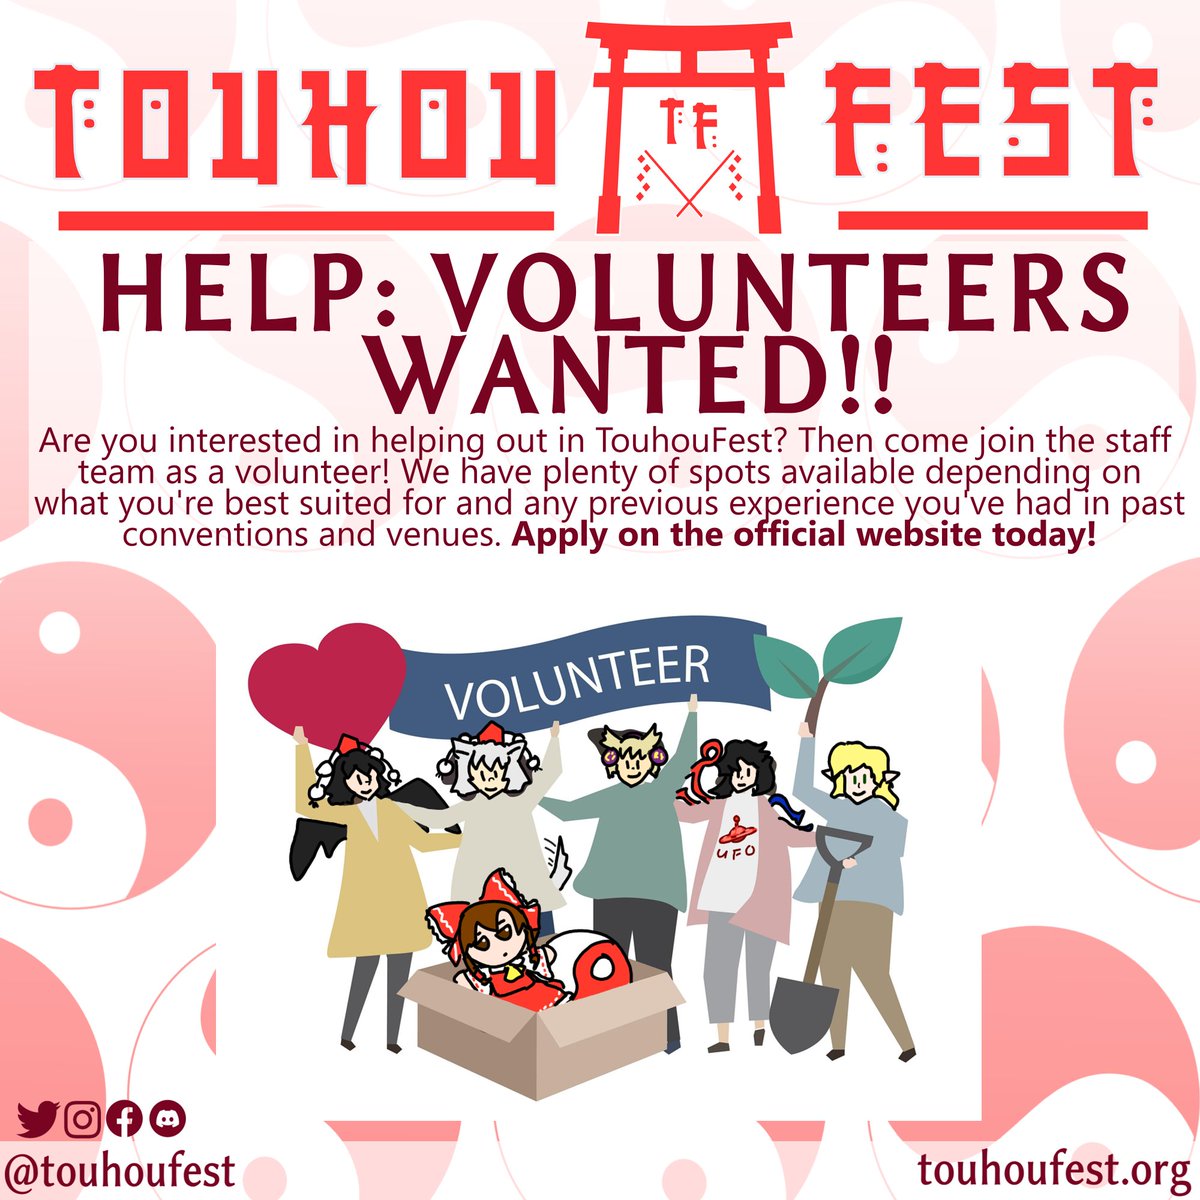 Applications for convention volunteers are now open! We need a loooot of hands on deck for the weekend, so don't worry about finding a position to take! Go visit our official website to apply today! touhoufest.org/applications